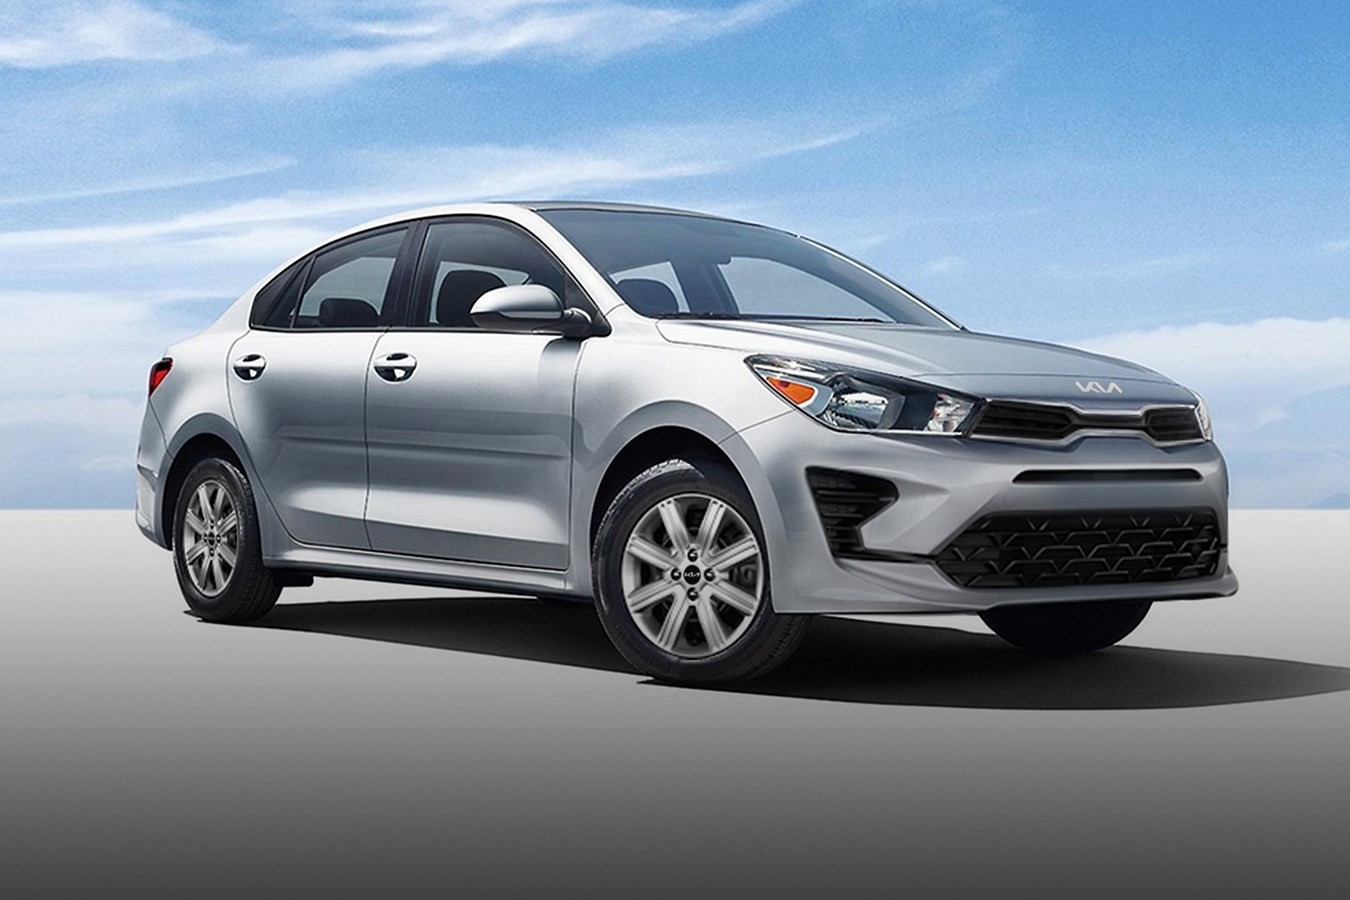 2022 Kia Rio Is One of the Most Affordable New Cars on Sale Stateside ...